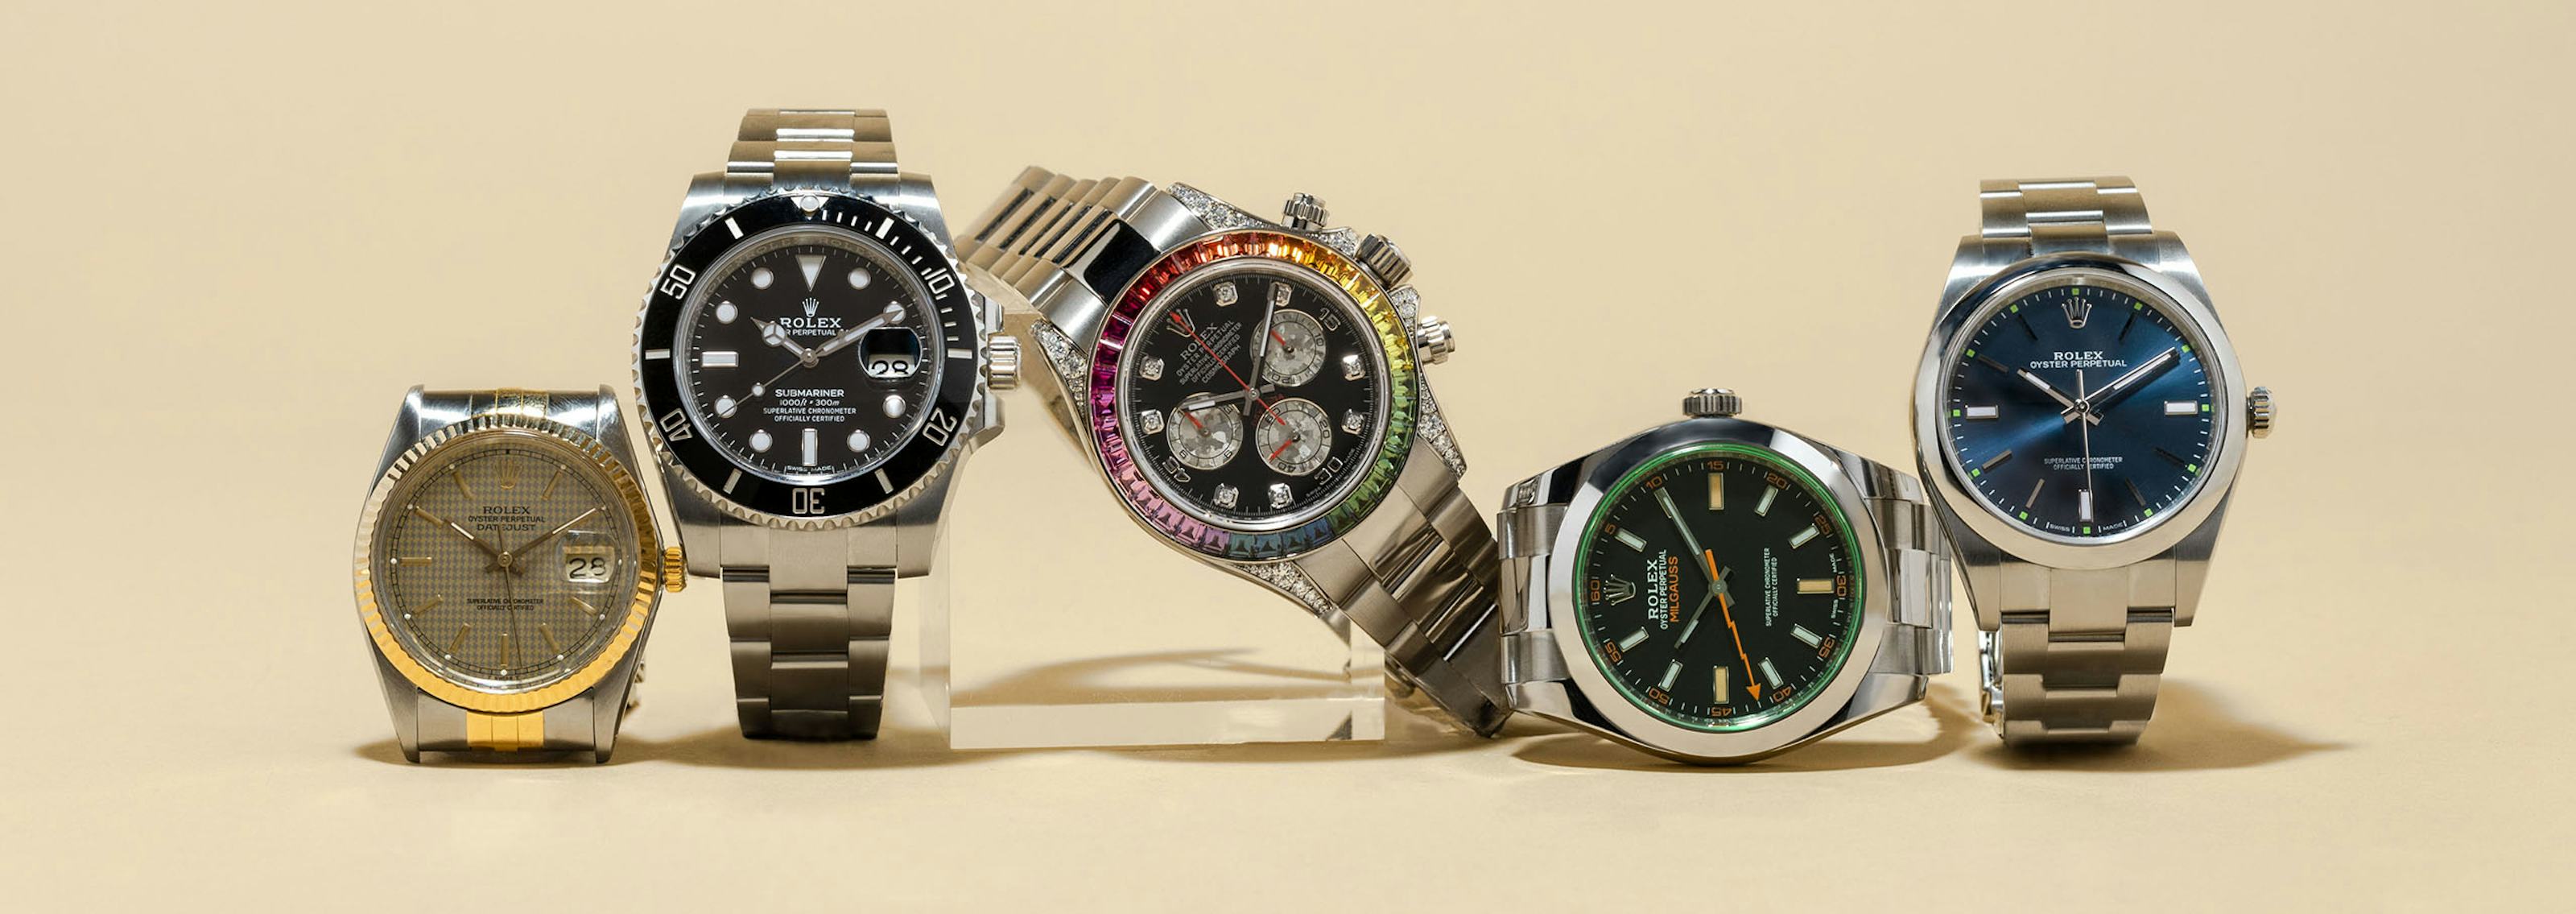 Rolex To Open Three Temporary Factories To Meet Increased Demand: Bloomberg